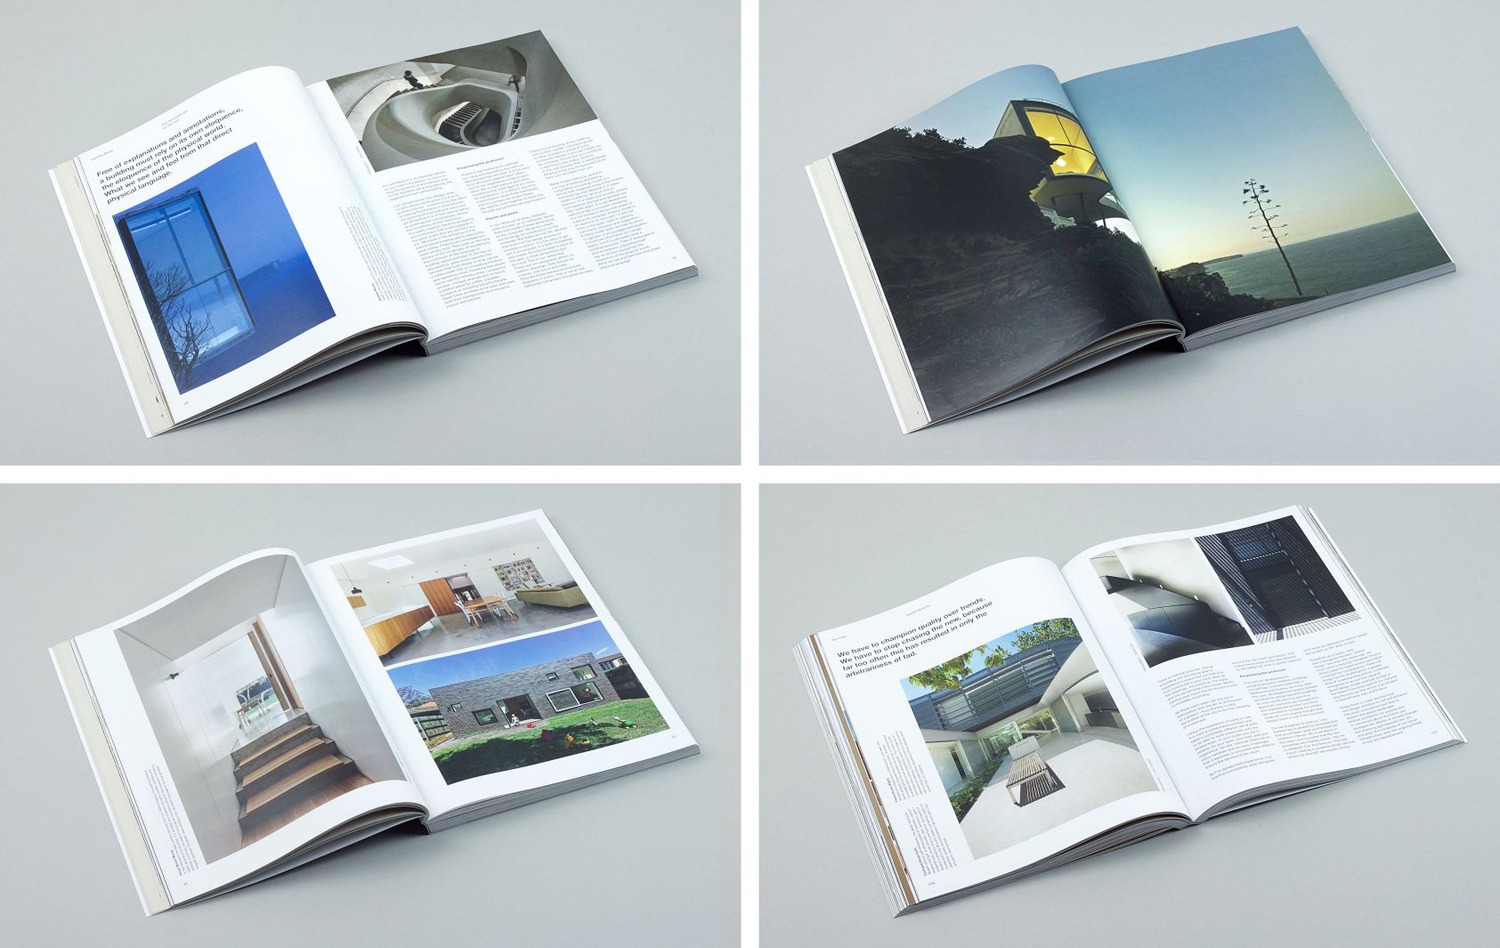 Architecture book design by Toko for Maven Publishing